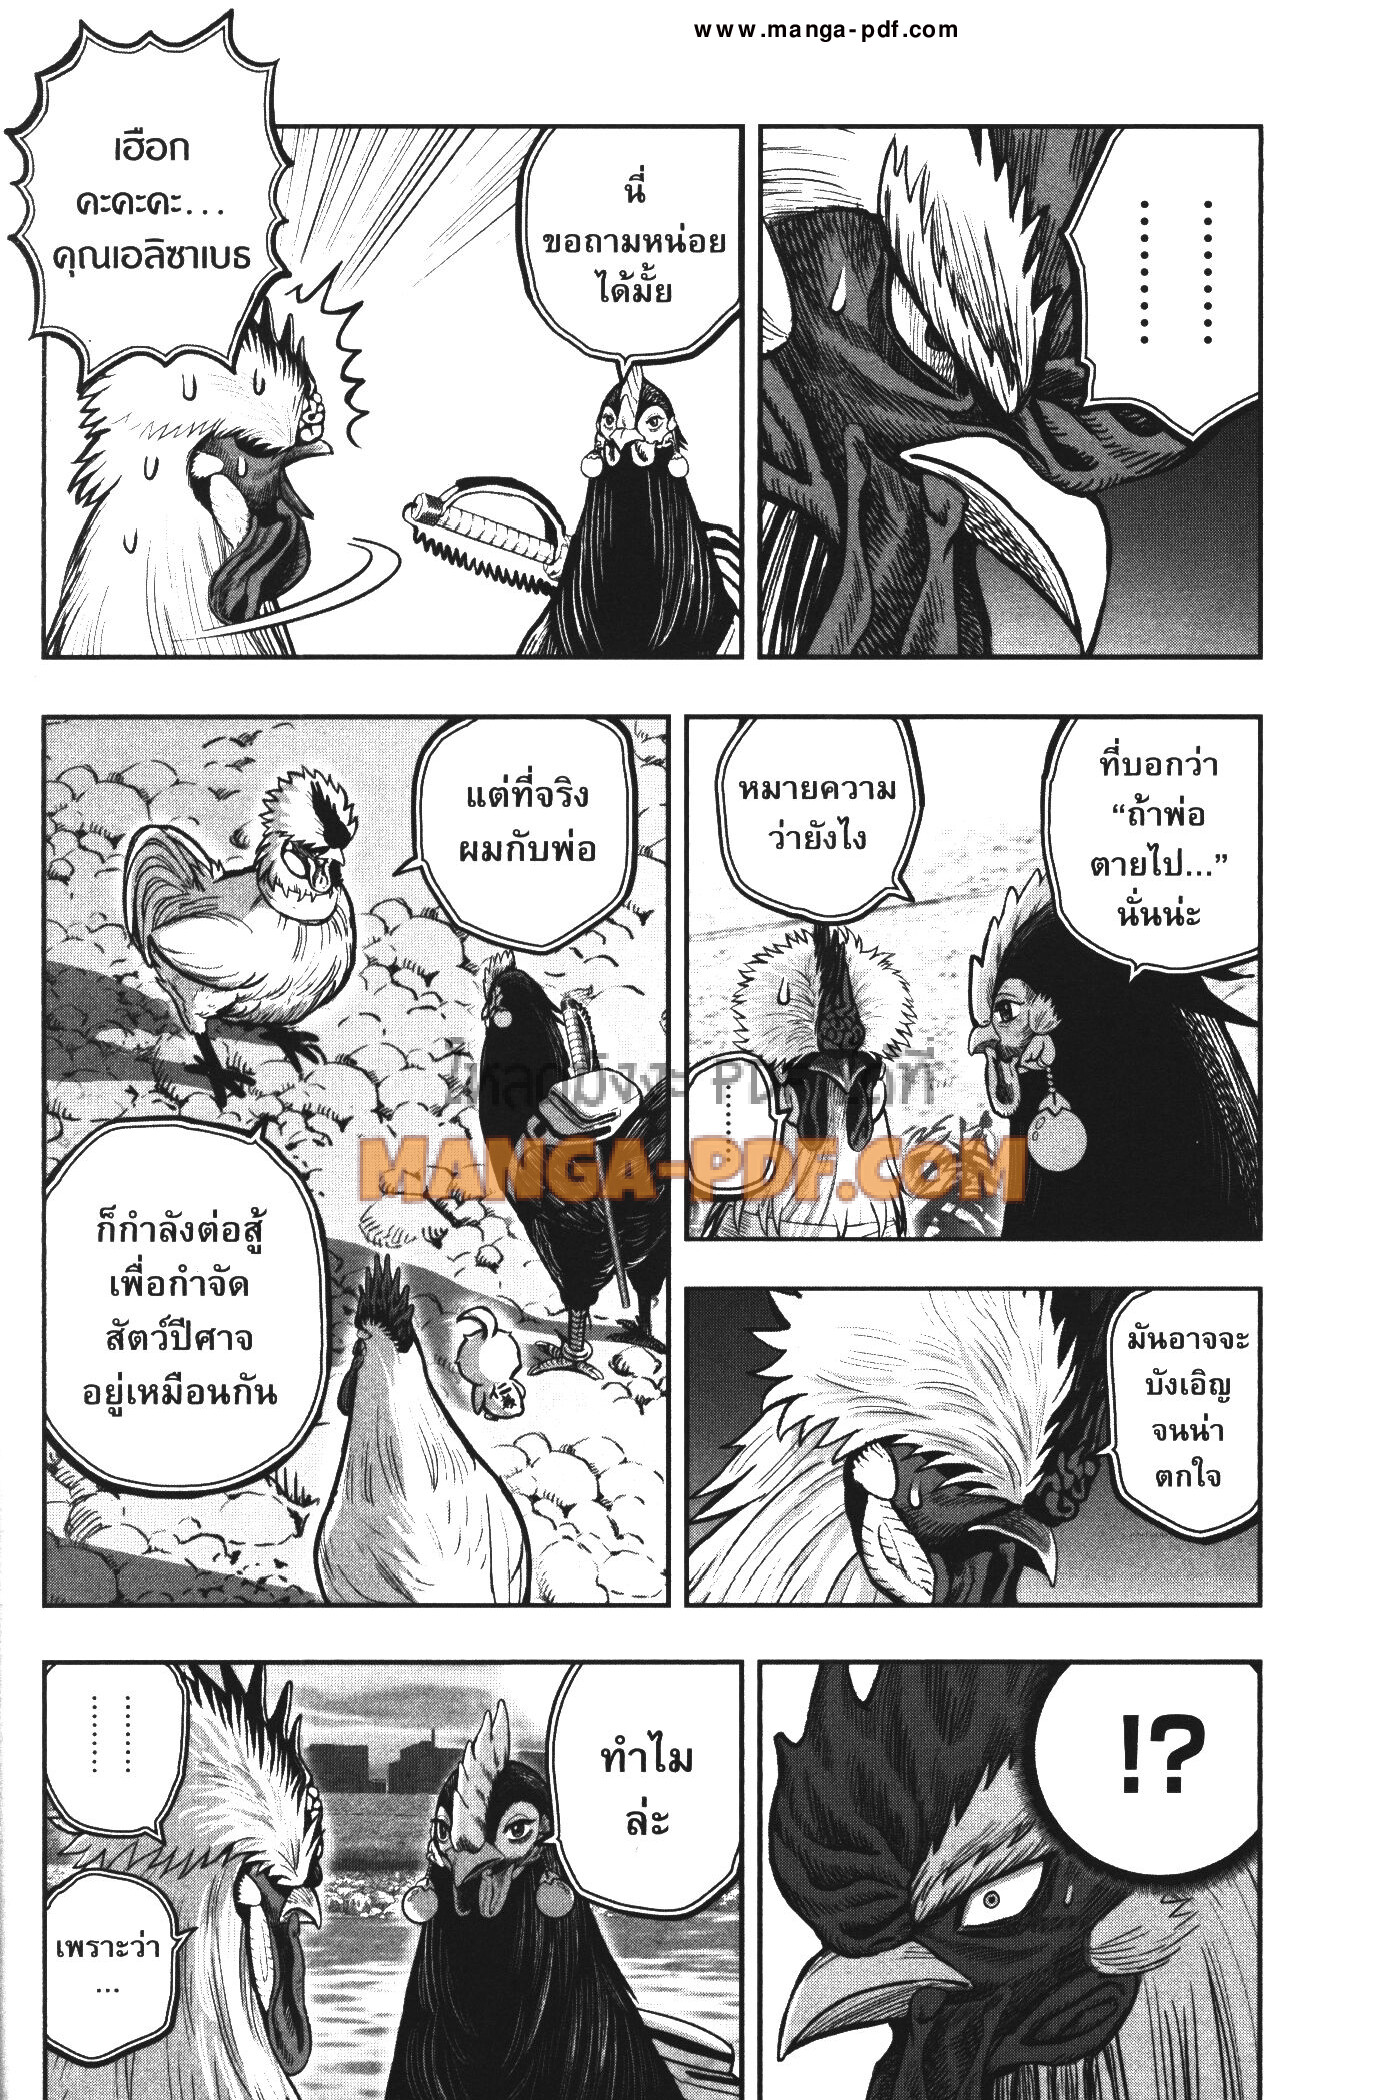 Rooster Fighter 20 (12)